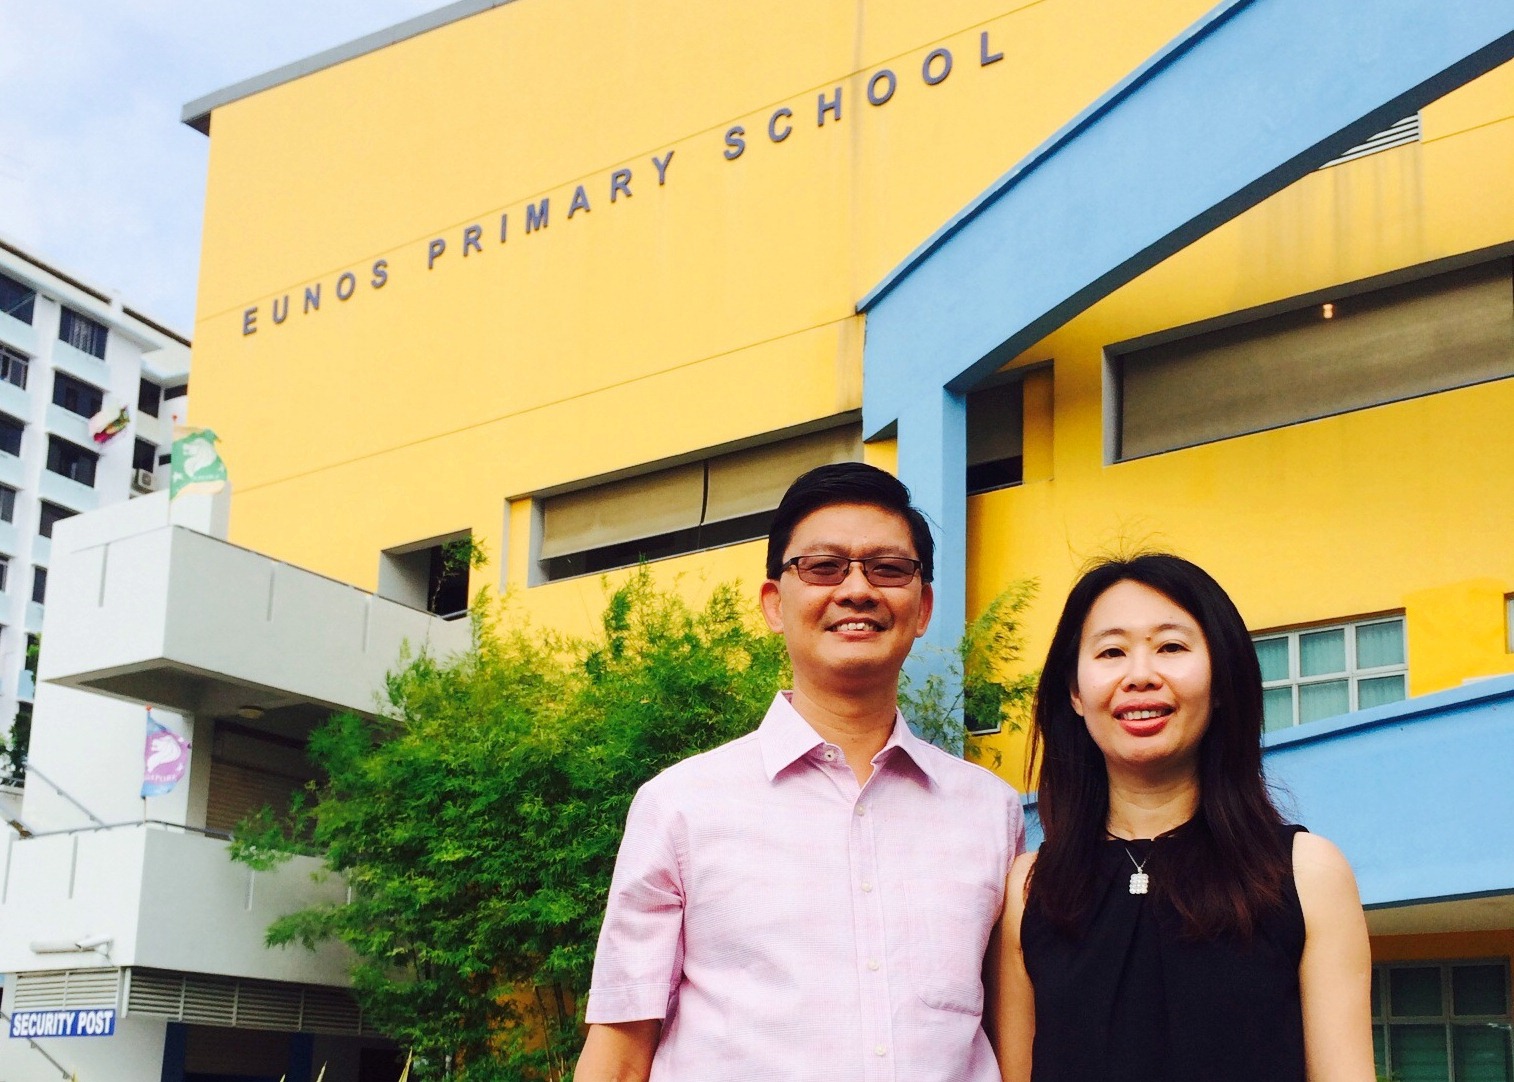 Mr and Mrs Toh, parents of 11-year-old Bryan, share with us why they think choosing Eunos Primary School was a good decision.